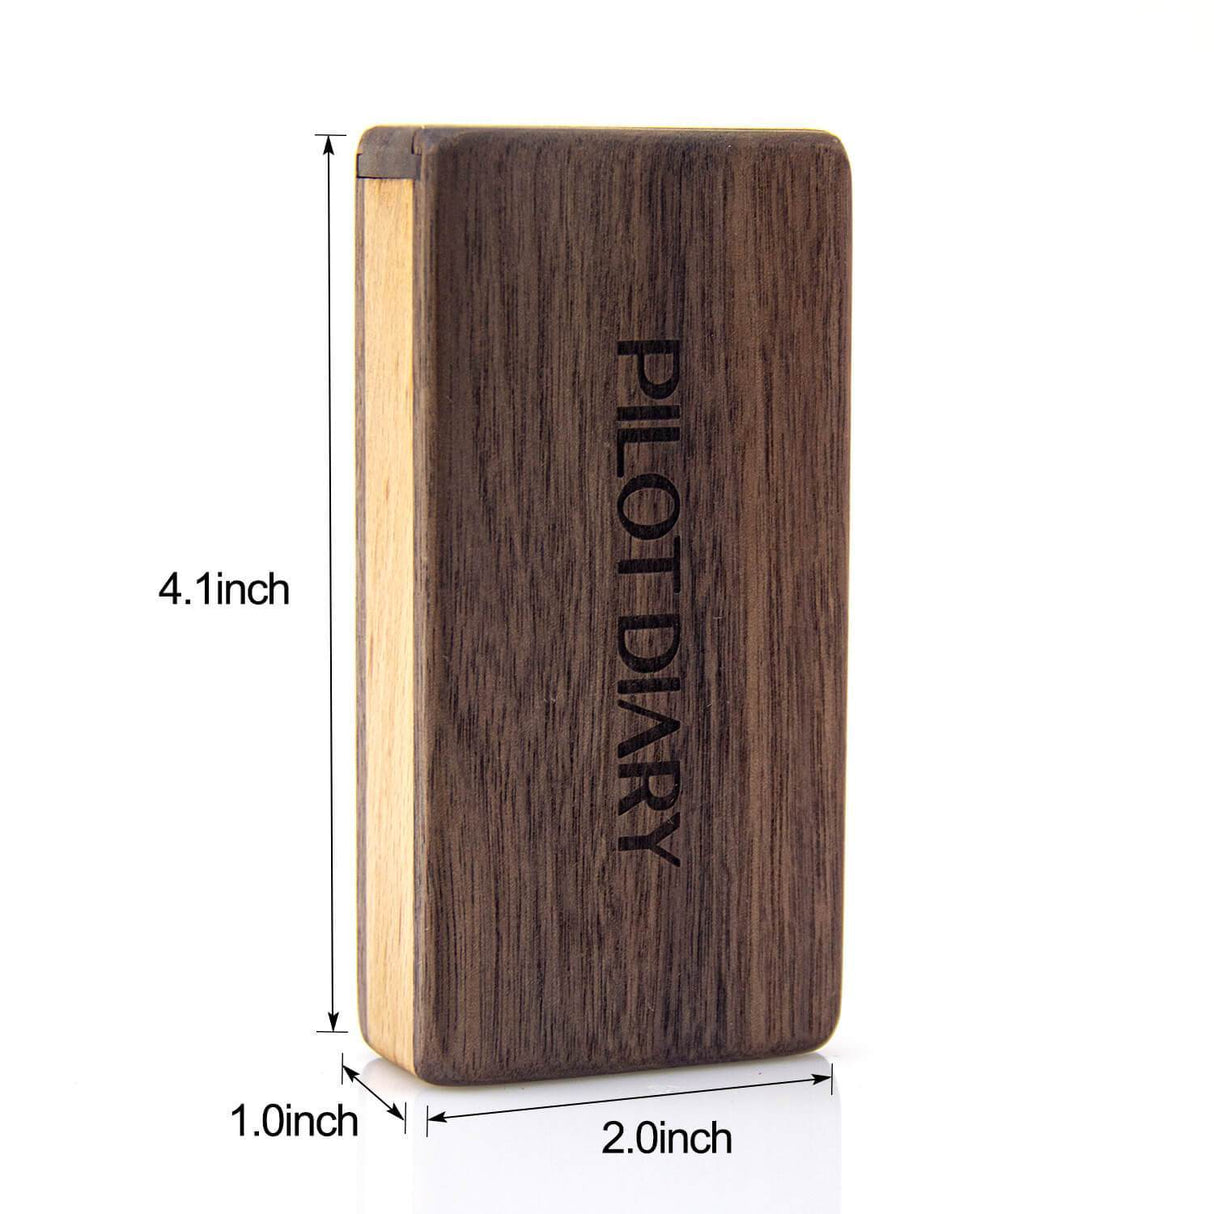 PILOT DIARY Wooden Magnetic Dugout - Front View with Dimensions